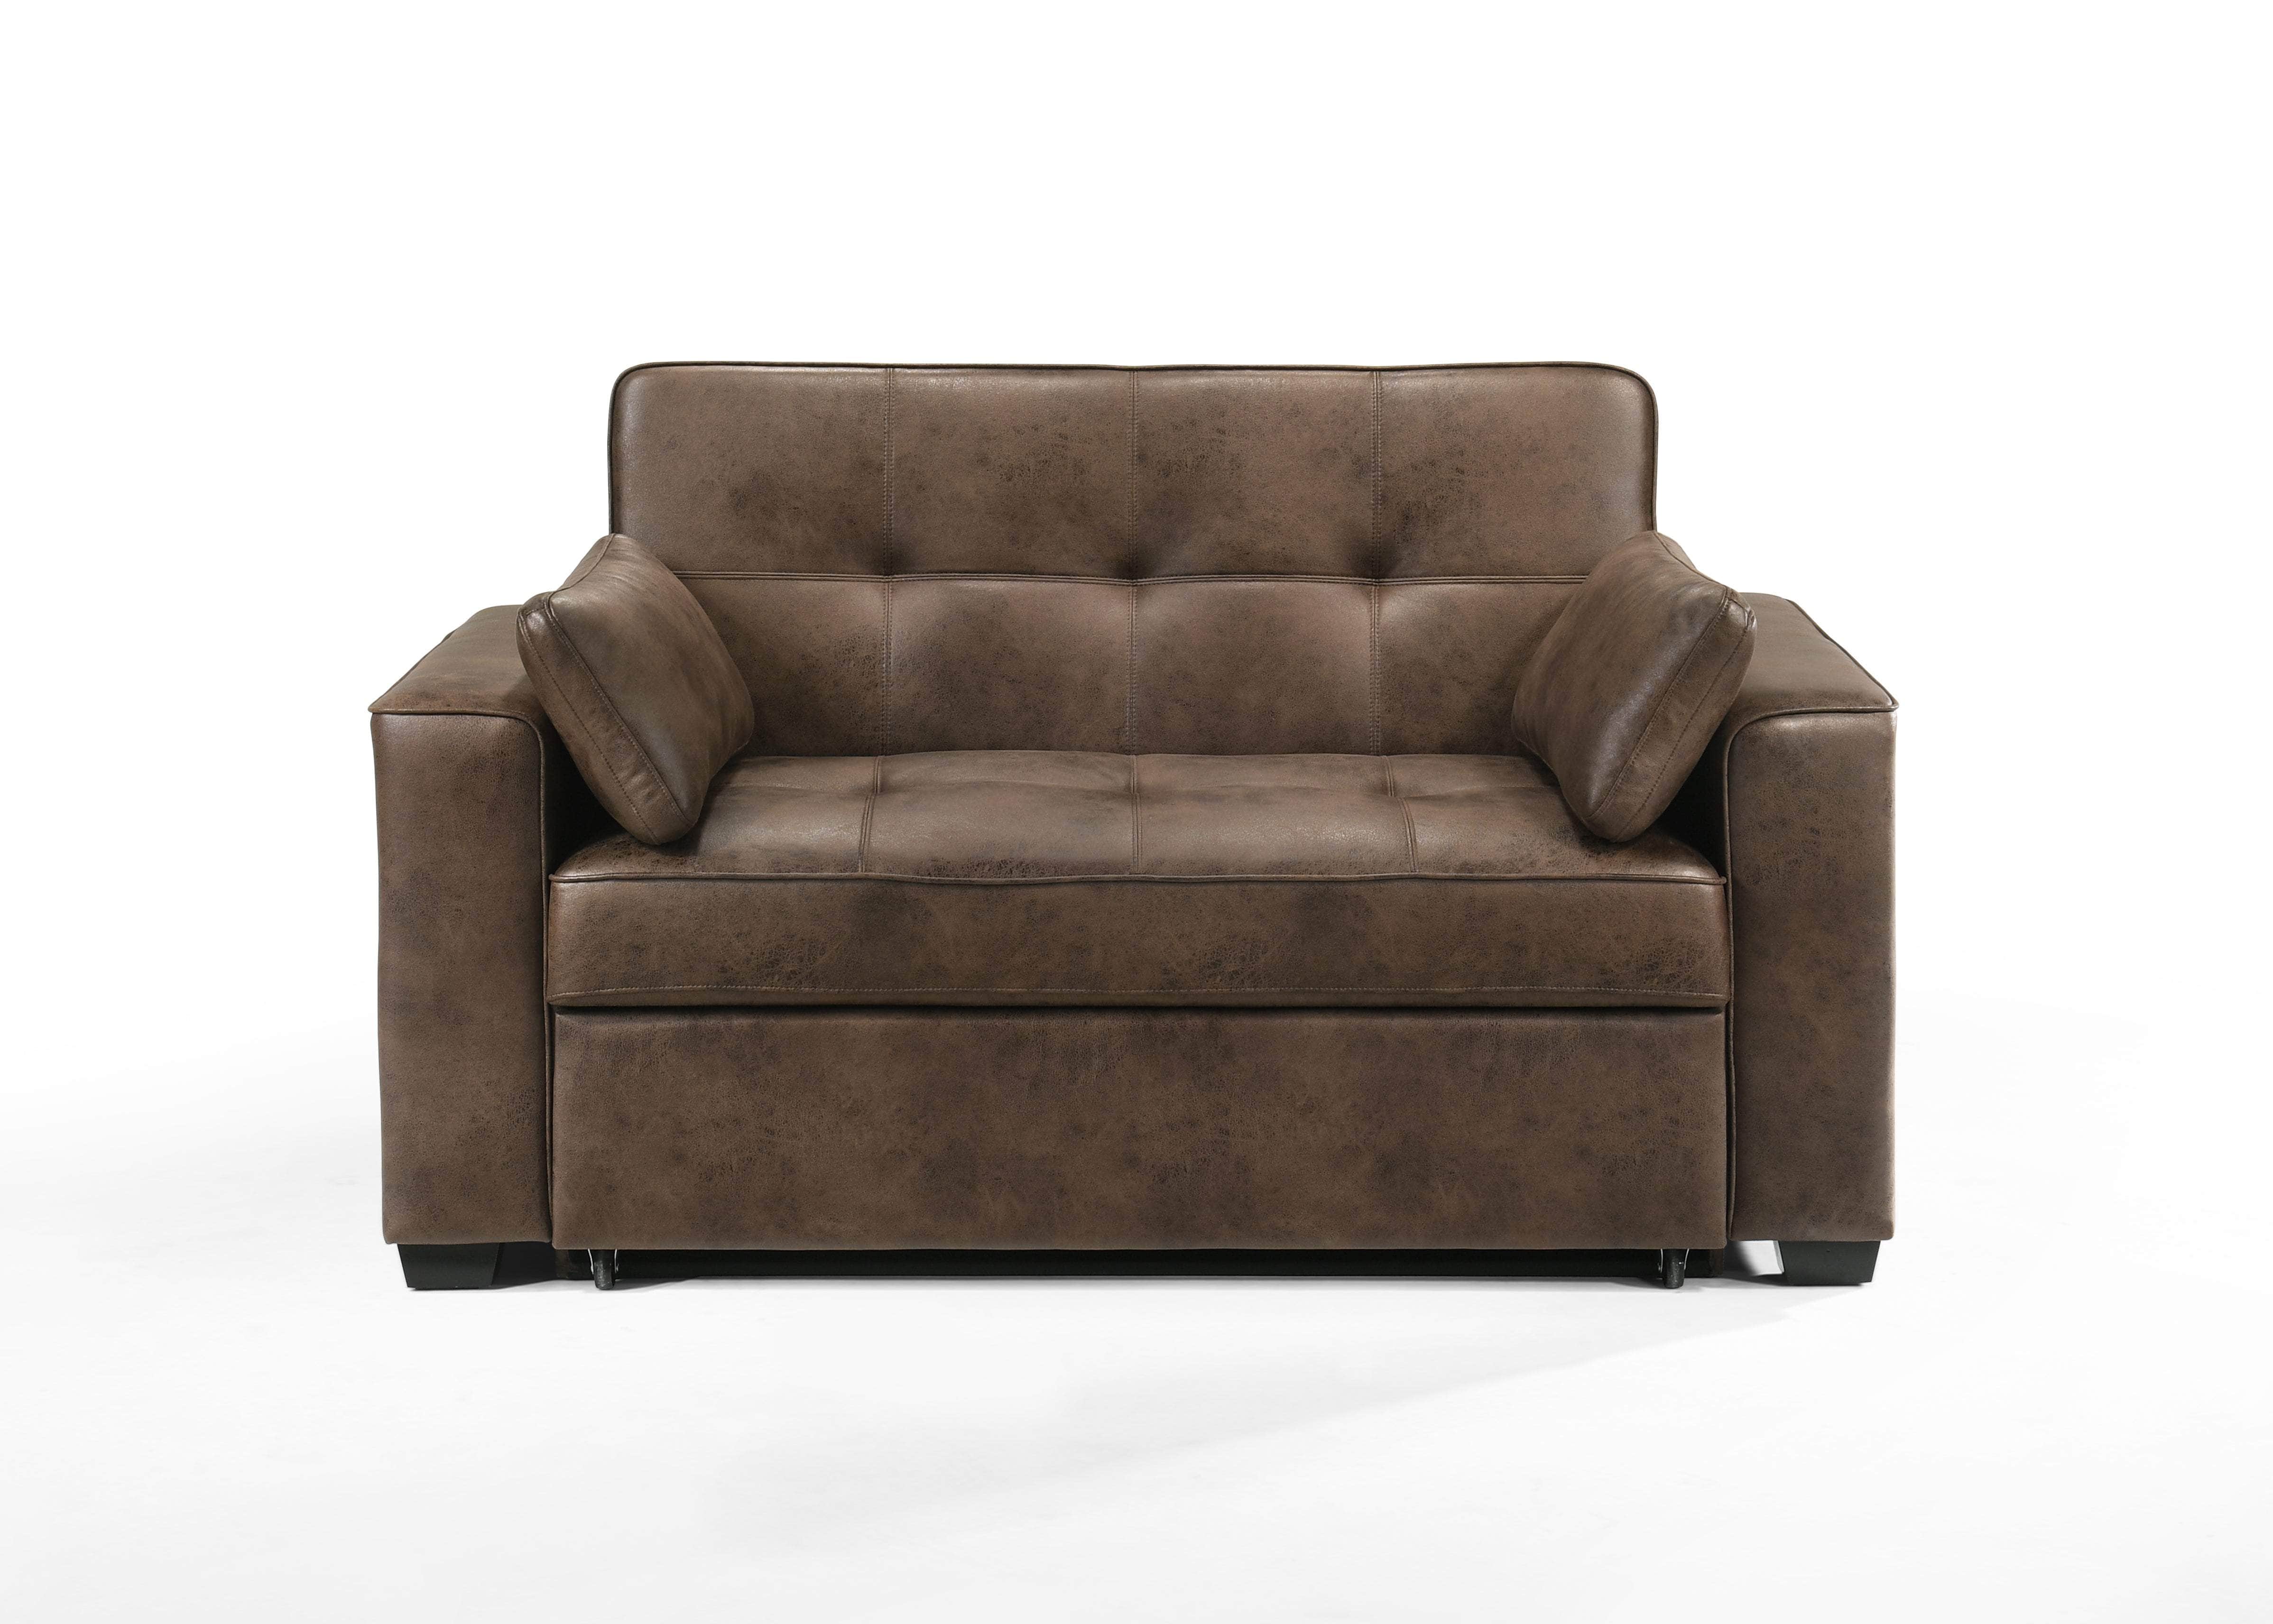 Night and Day Sofa Bed Walnut Brooklyn Full Size Sleeper Loveseat Sofa Bed - Available in 3 Colours